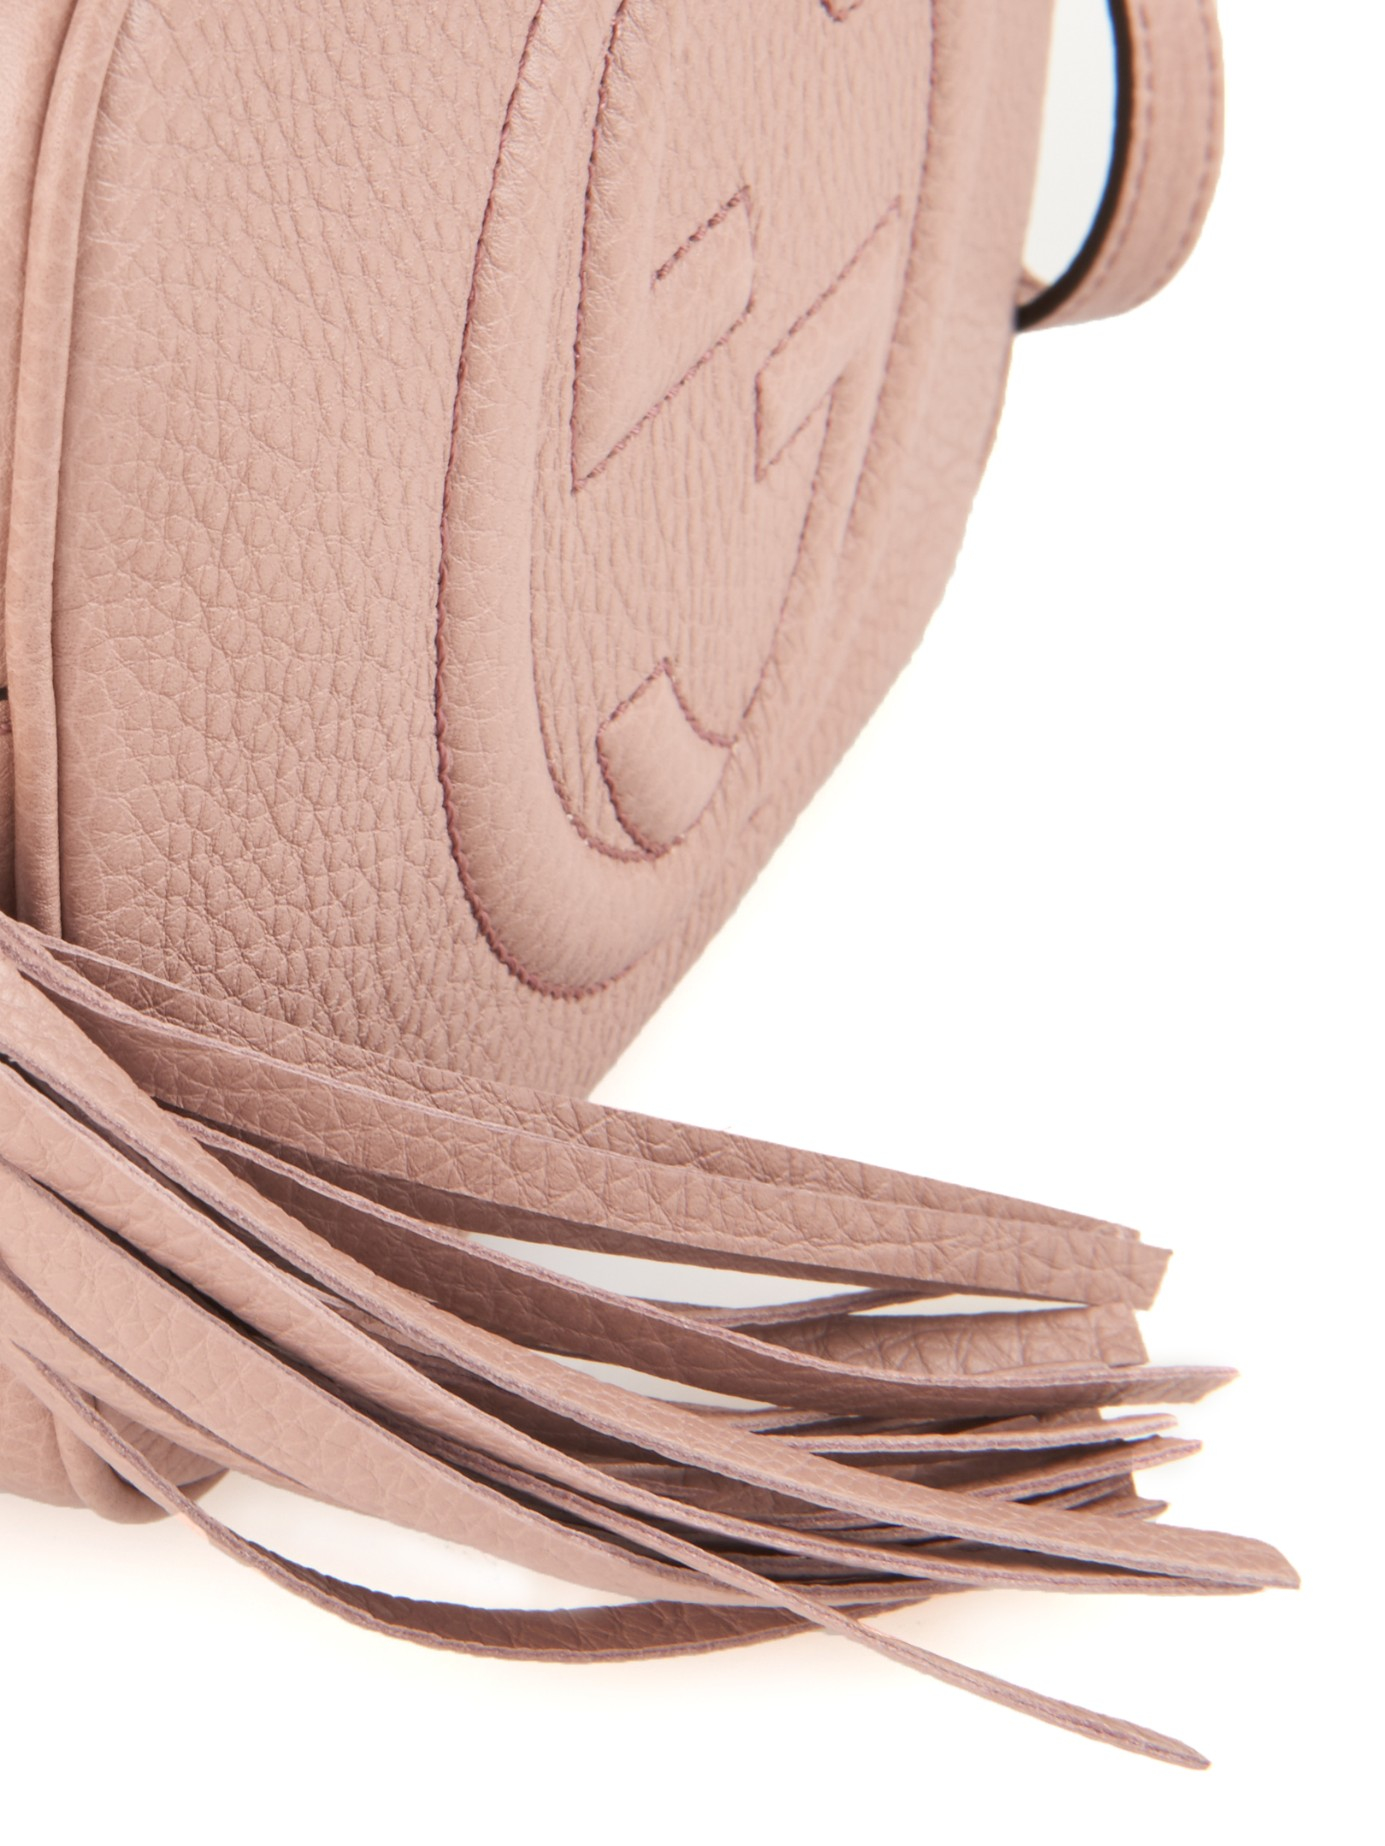 Gucci Soho Leather Cross-Body Bag in Light Pink (Pink) - Lyst